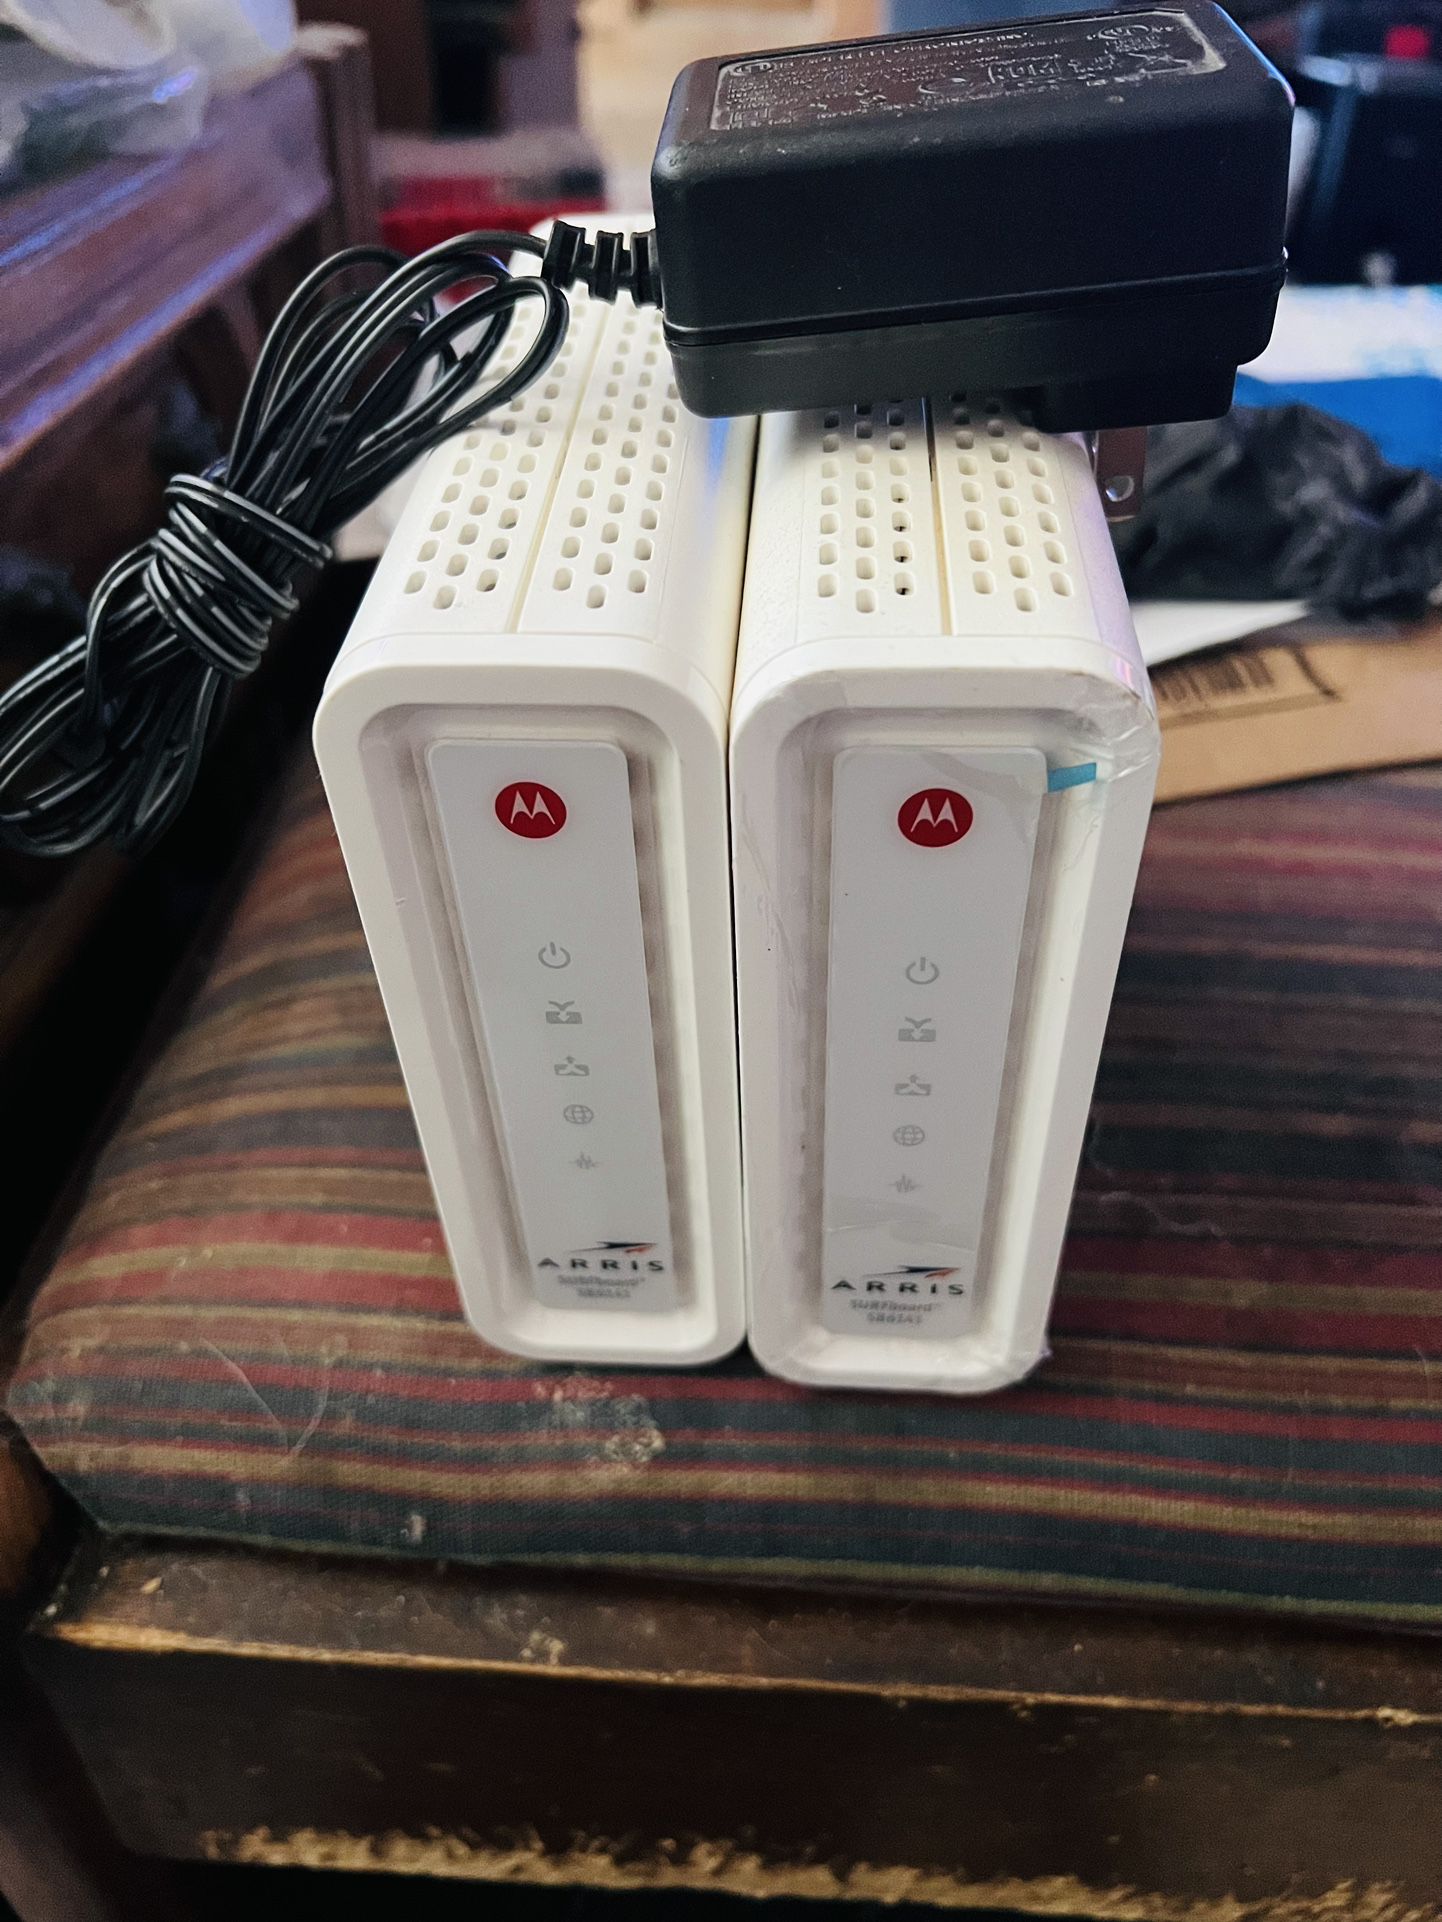 Both Are Arris  SB6141 Cable Modems  PICKUP IN FONTANA